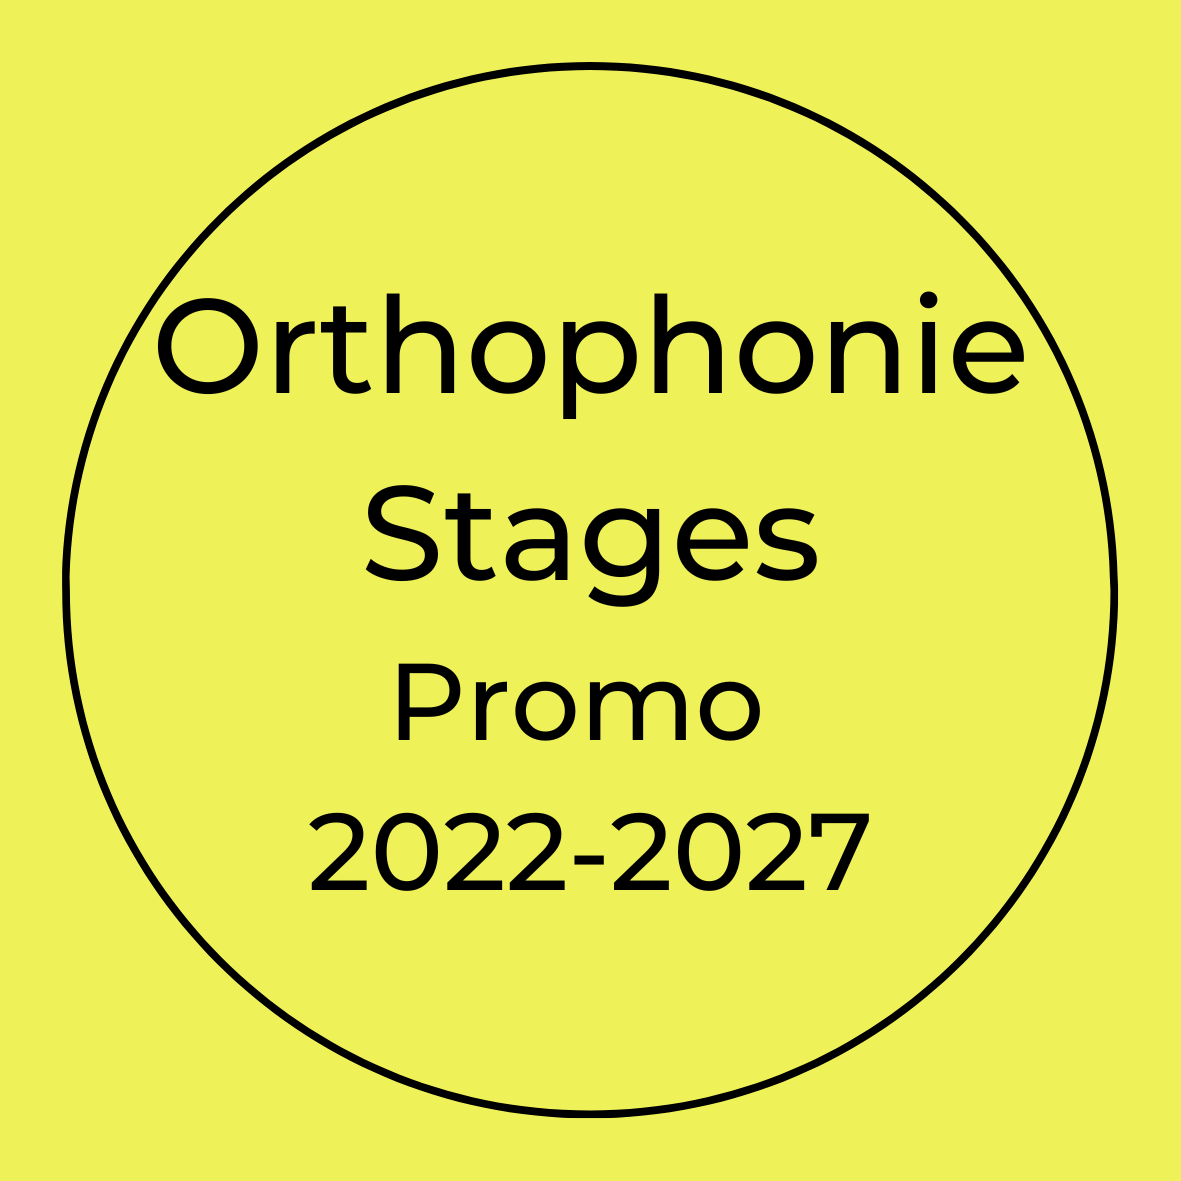 Orthophonie Stages Promo 2022-2027